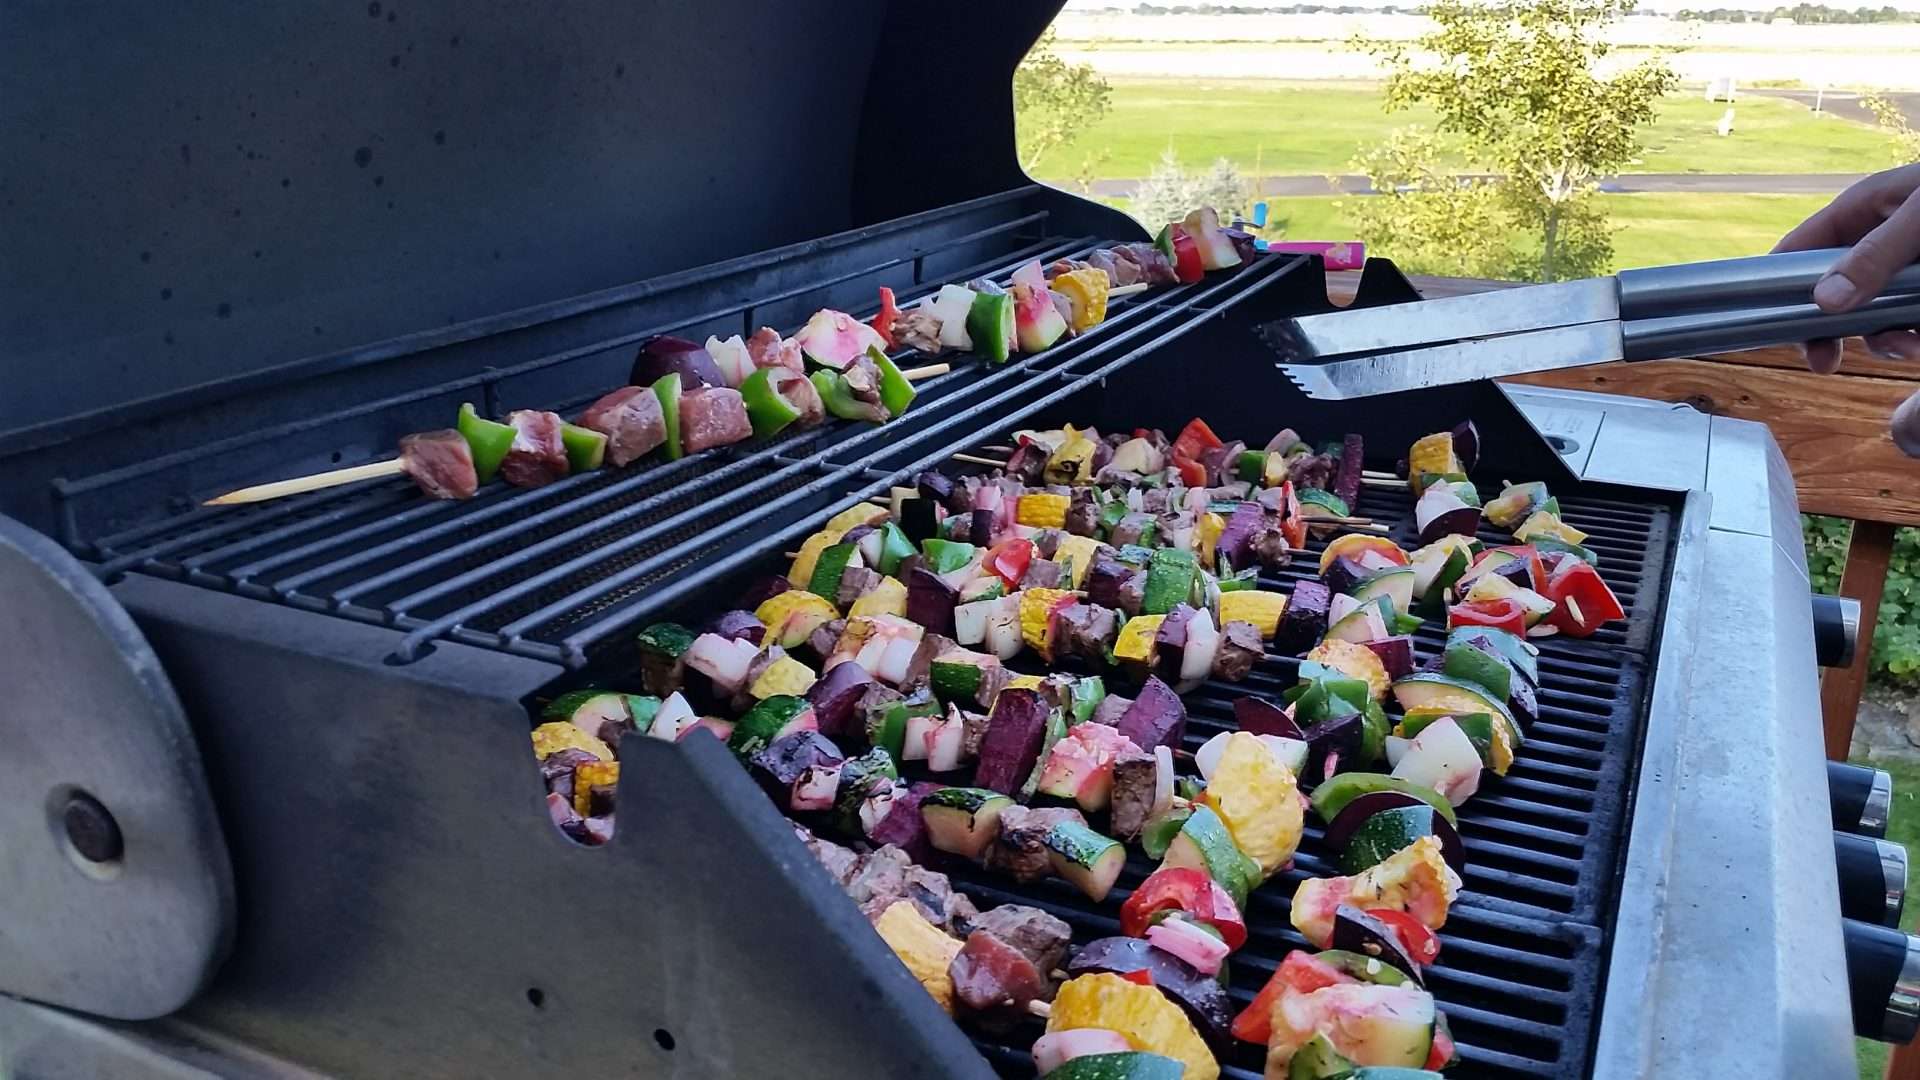 Grilling at an RV campsite.